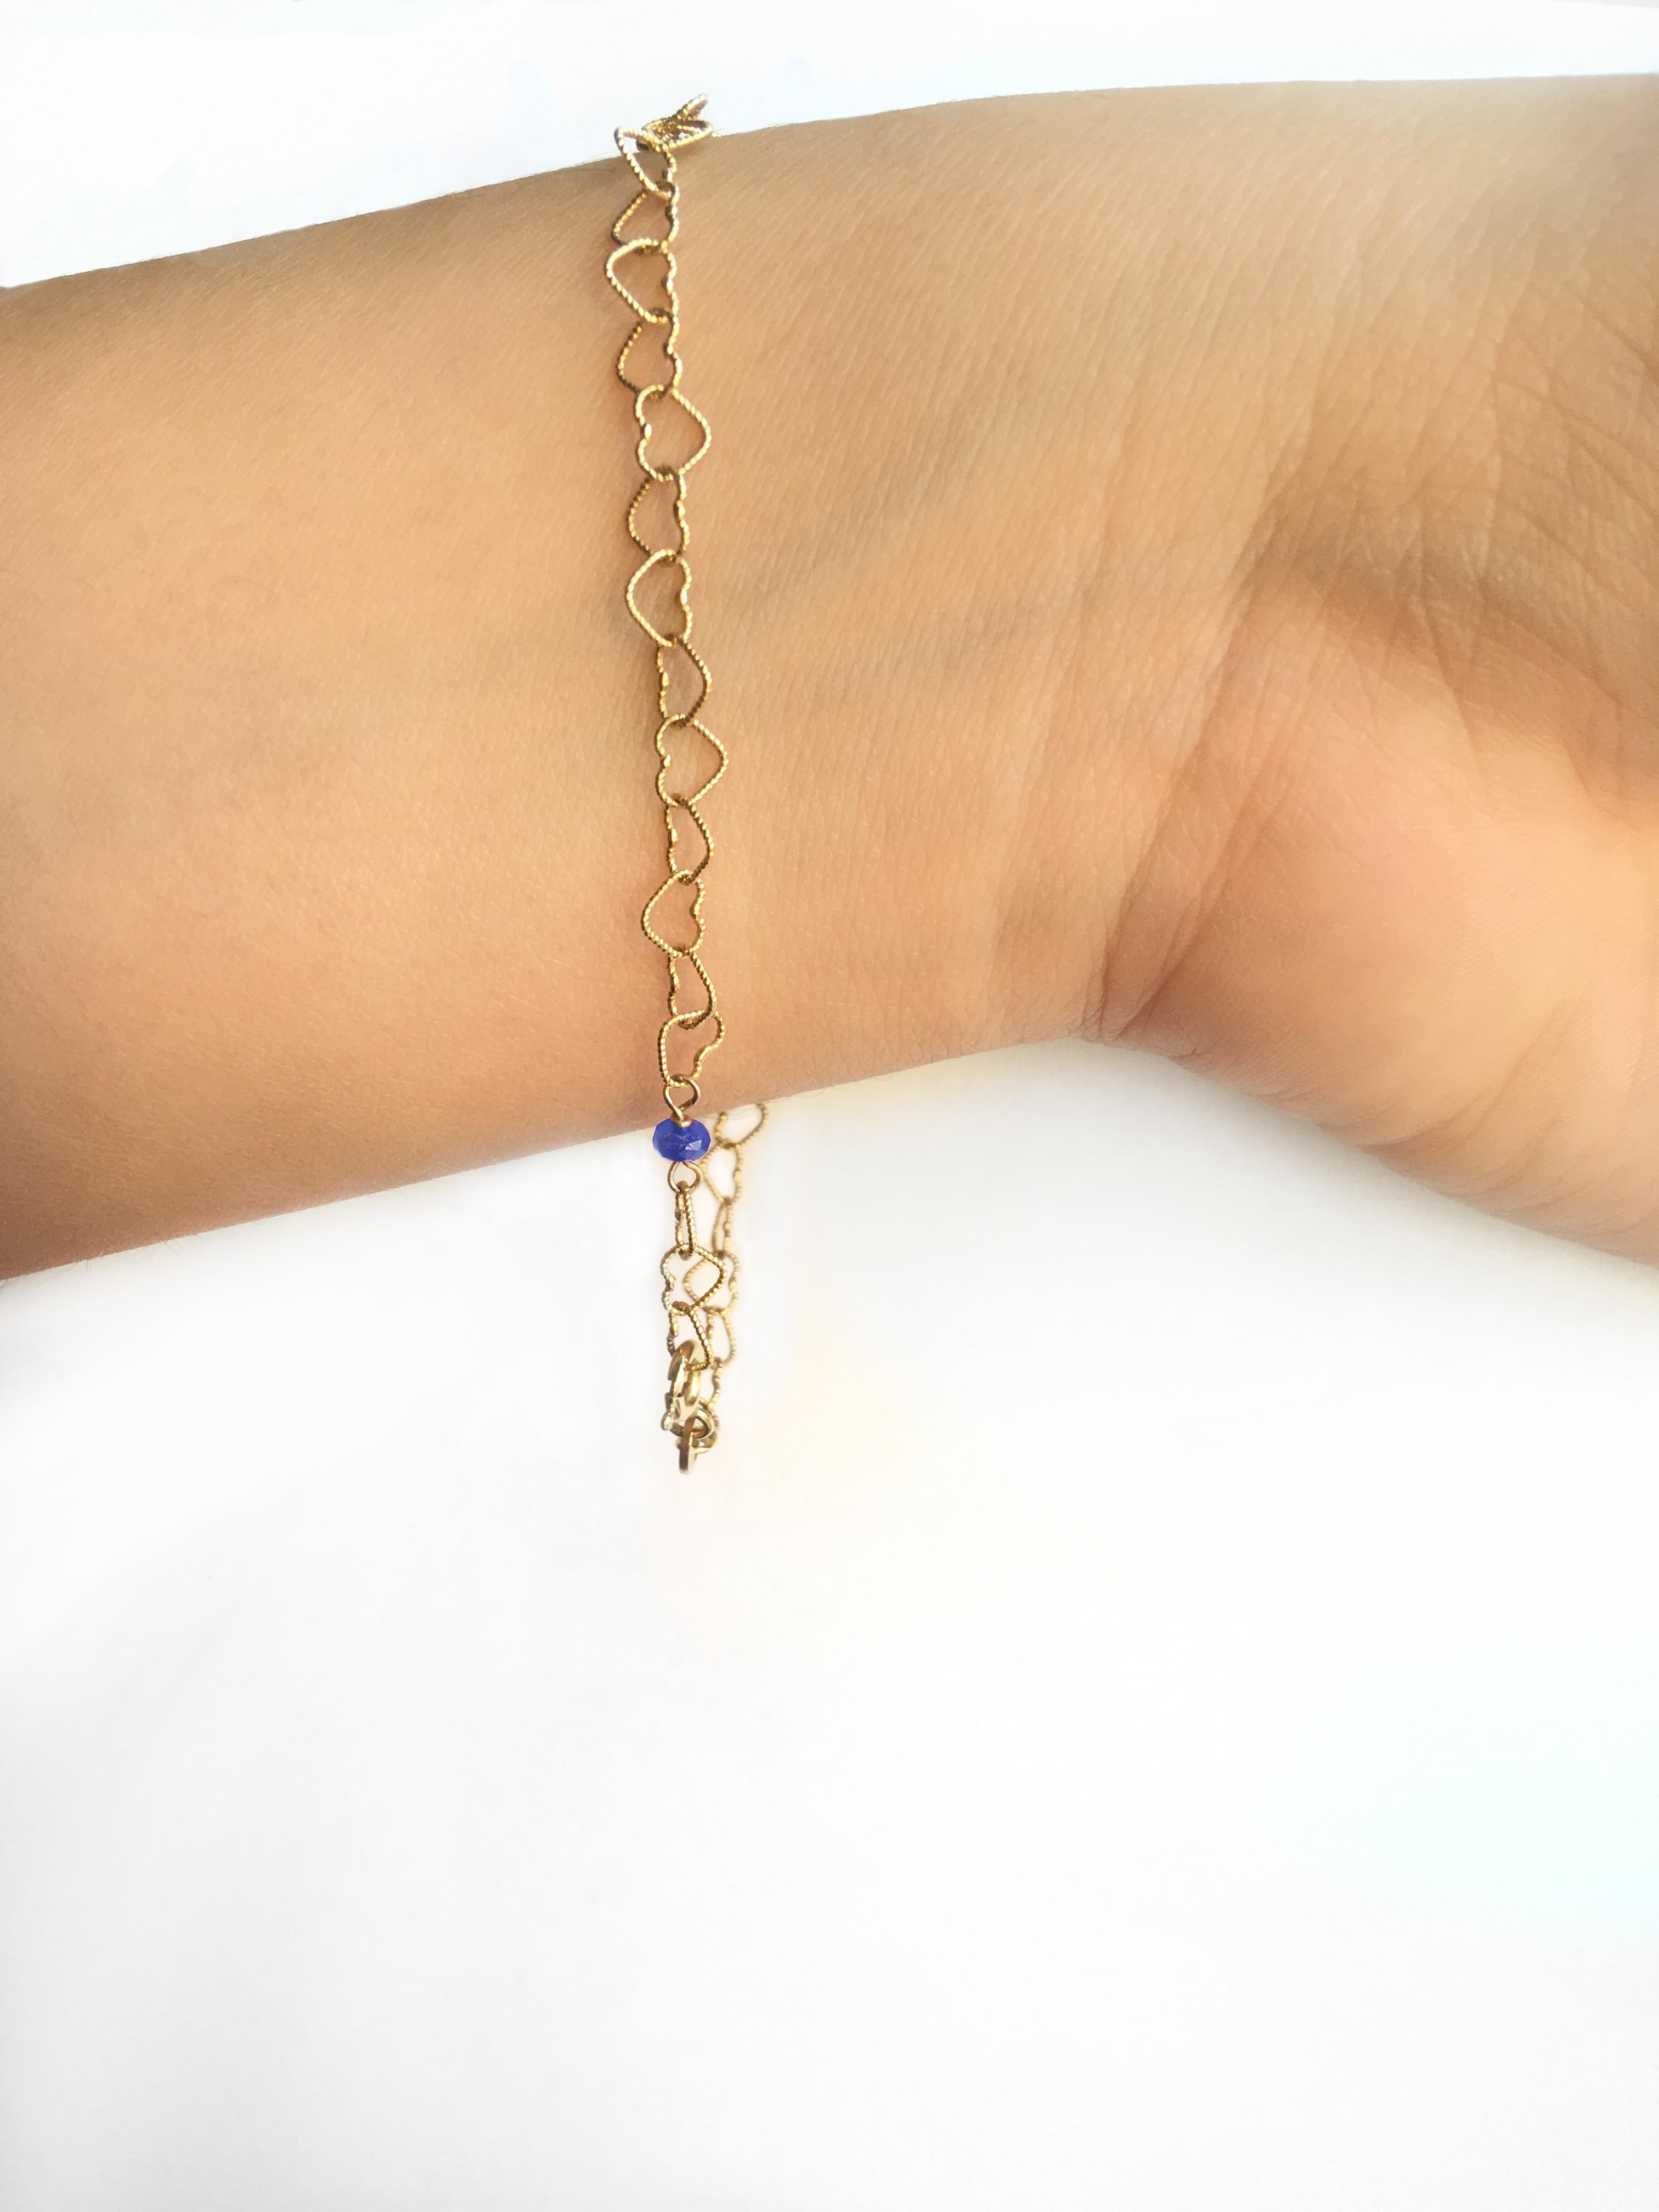 Romantic Style 18 Karat Yellow Gold 0.30 Carat Sapphire Bead Little Hearts Chain Bracelet.
The chain is linked by hand and slightly hammered to fit the perfect bracelet shape. A romantic style bracelet with deep Blue Sapphire bead that fits every